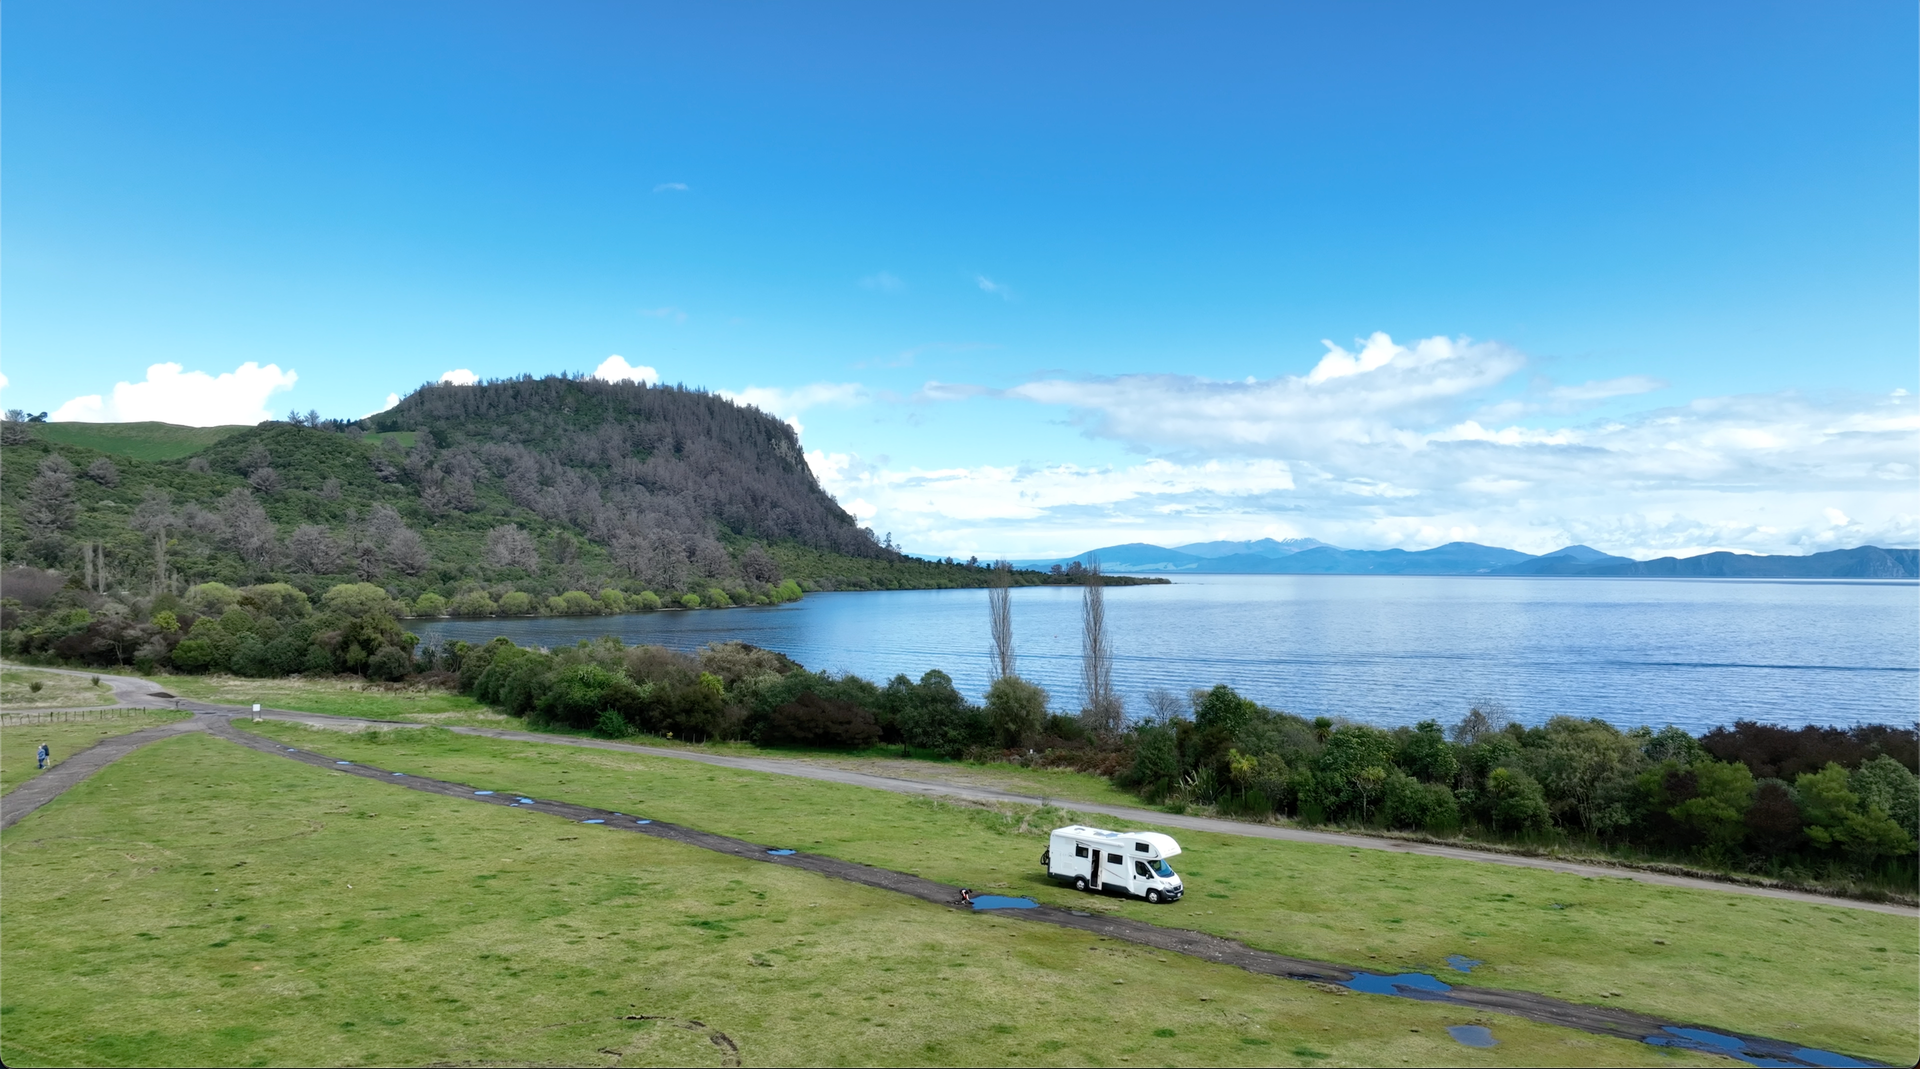 Campervan parked on the lawn at Whakaipō Bay Recreational Reserve with view over Lake Taupo